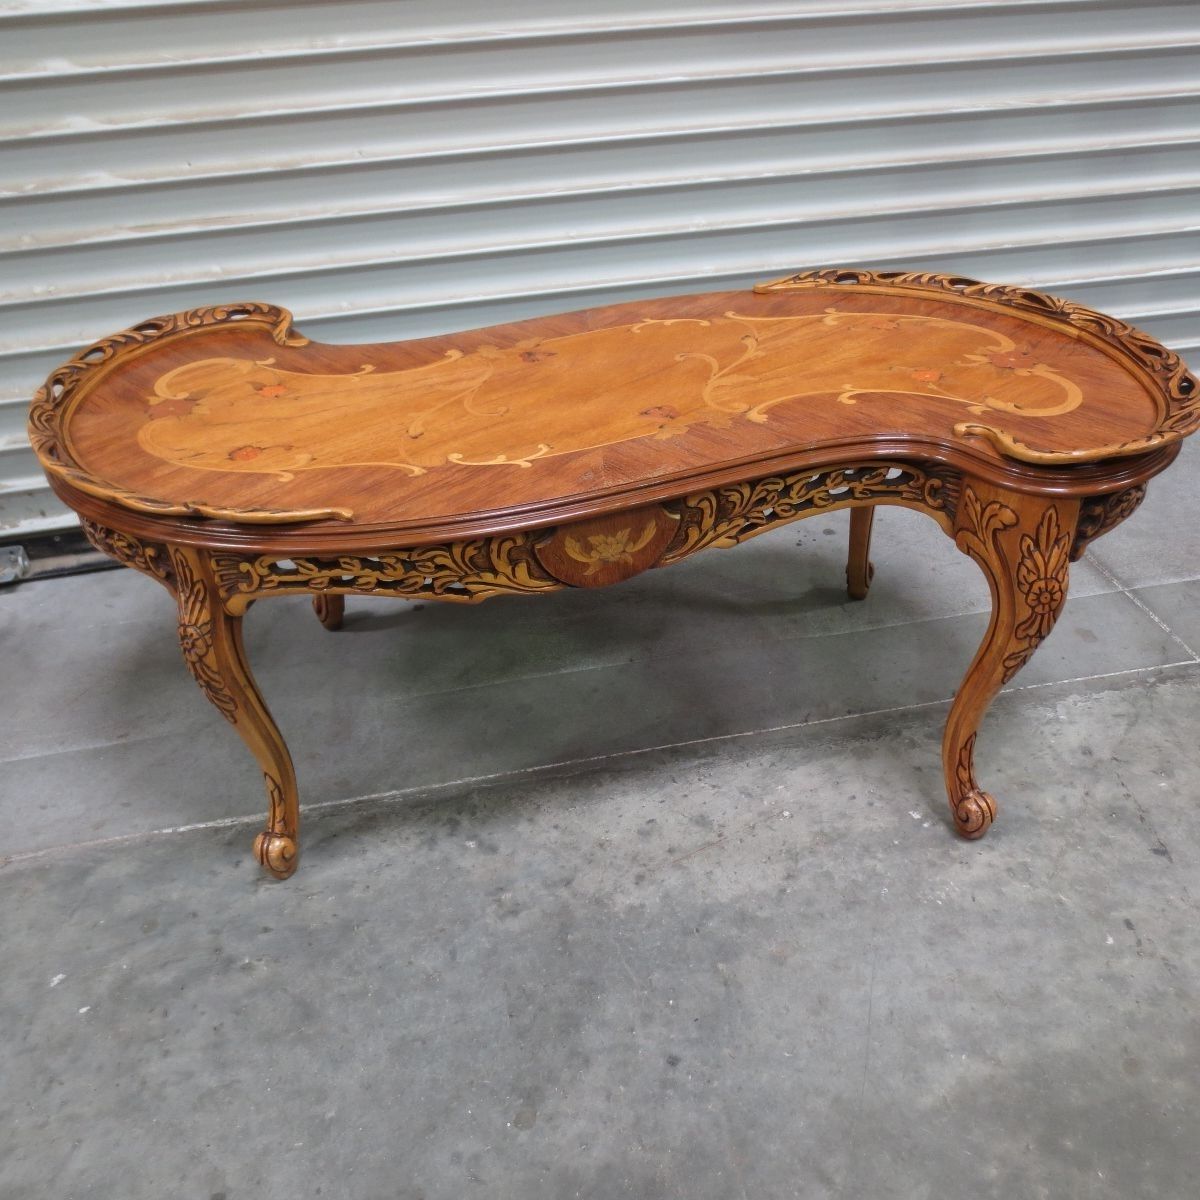 Antique French Provincial Coffee Table ~ Mrbeasleys (View 5 of 20)